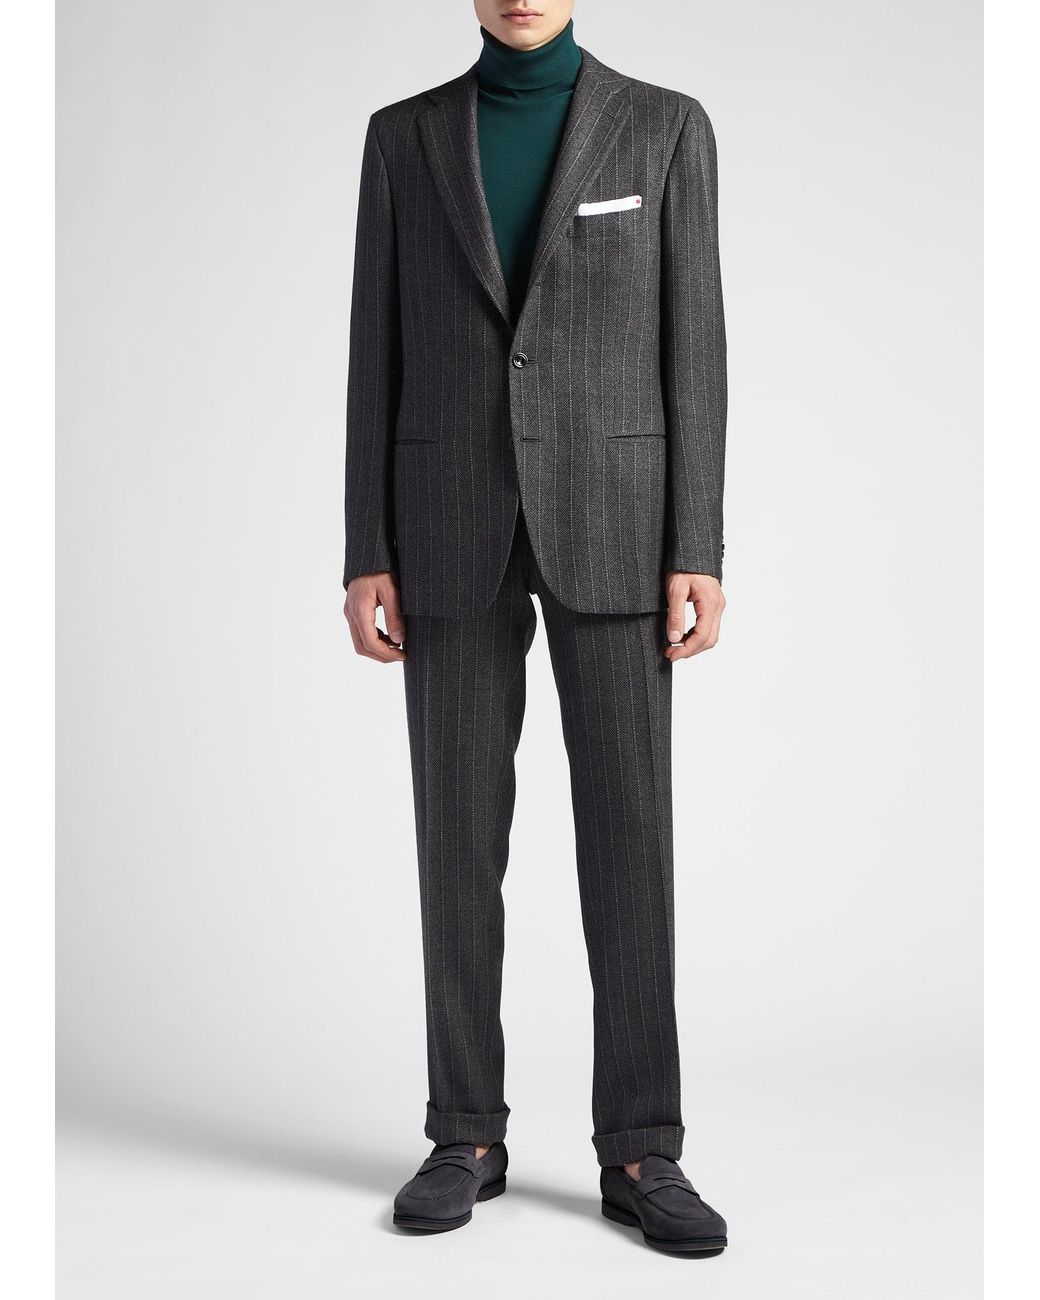 Kiton Cashmere Pinstripe Suit in Gray for Men | Lyst